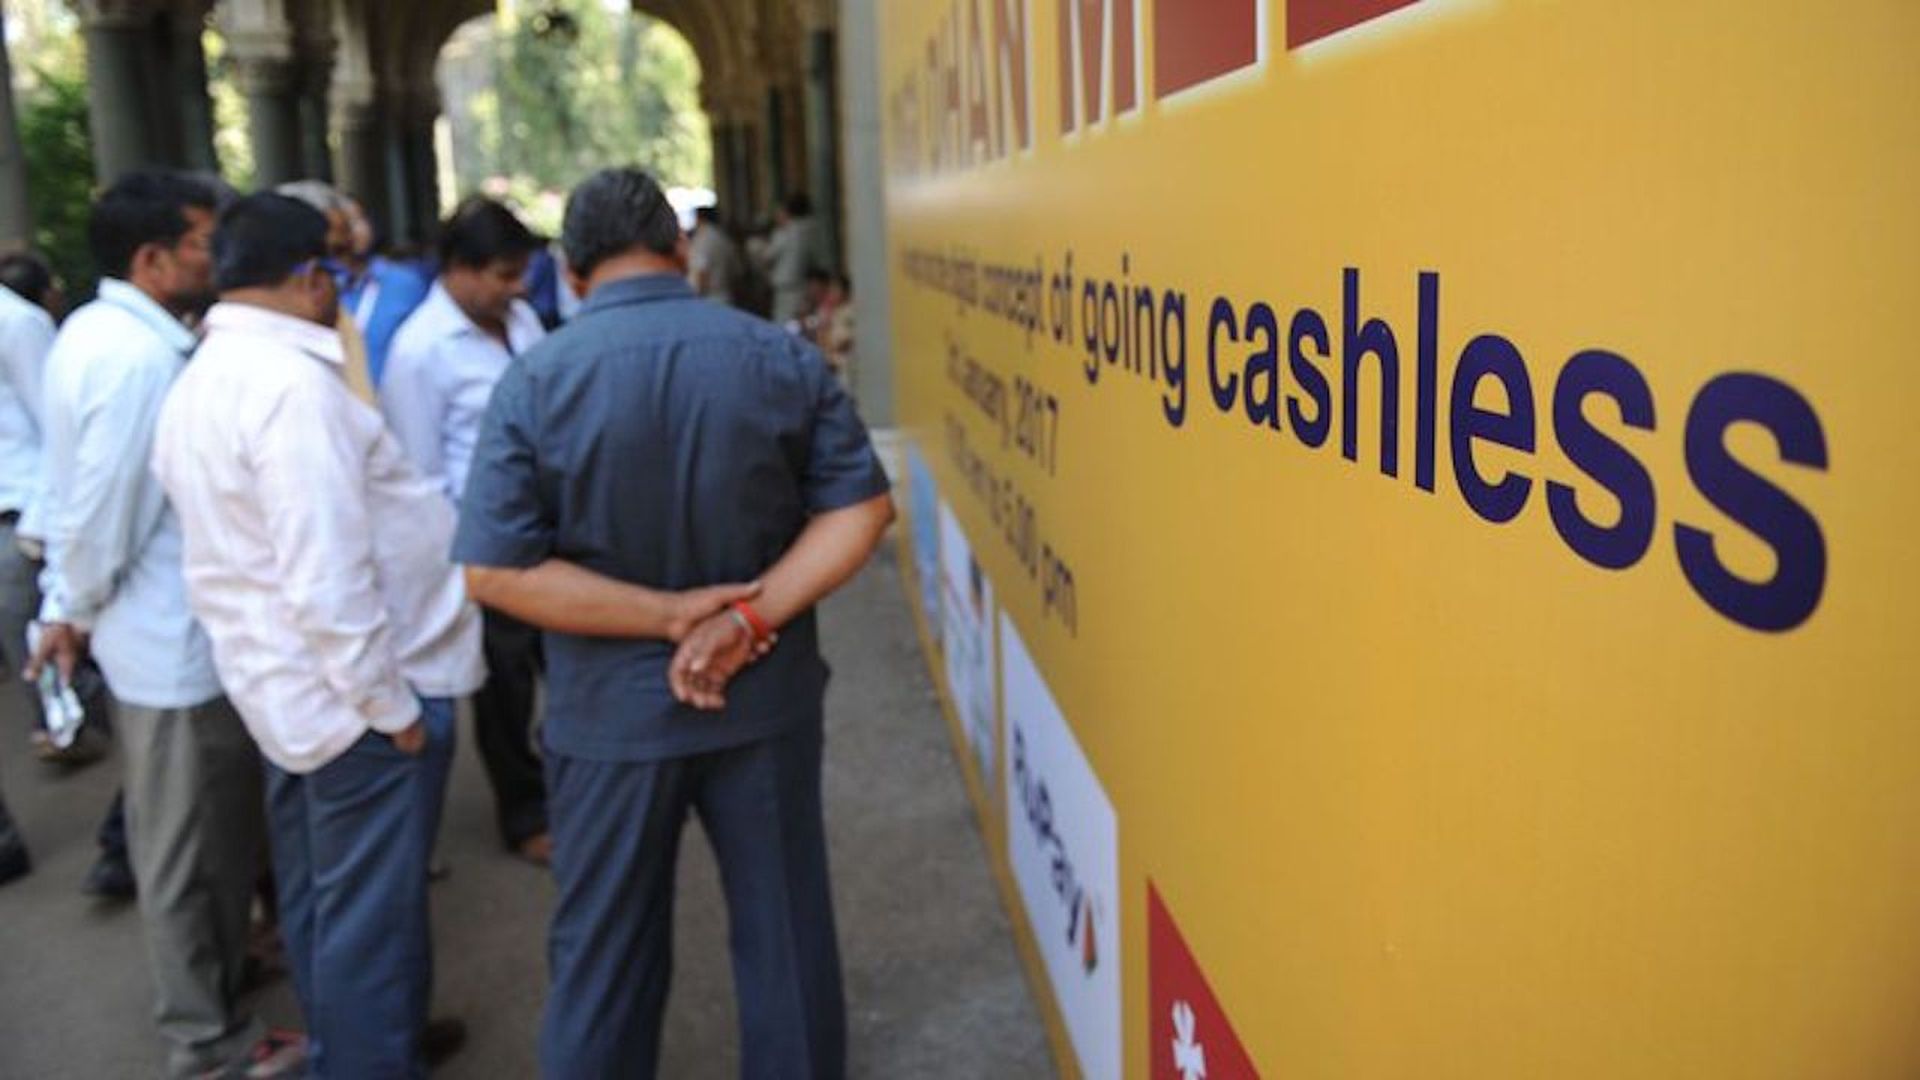 A billboard promoting e-payments in Mumbai